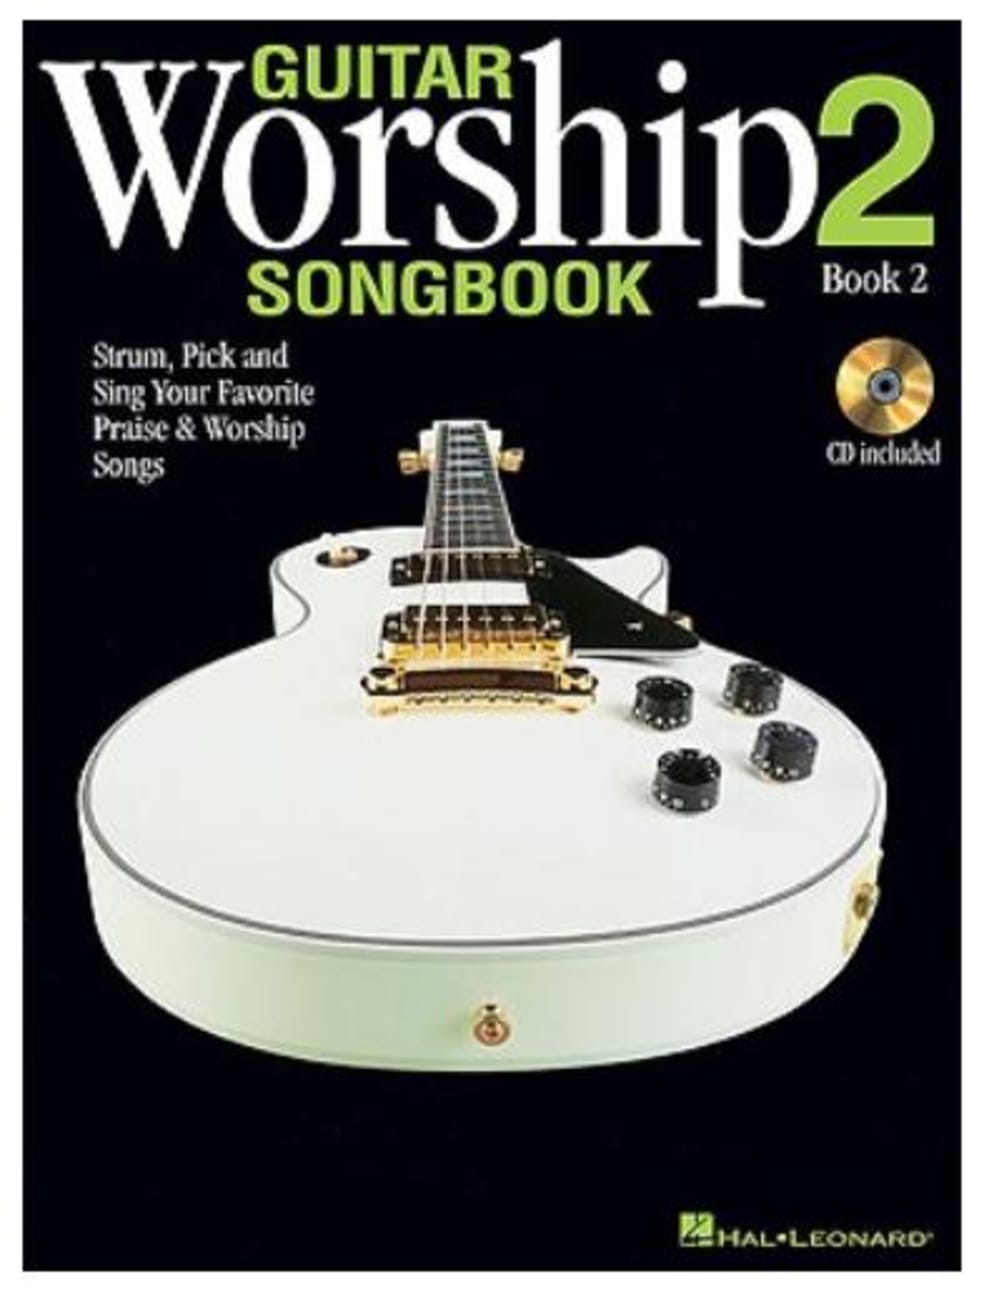 Guitar Worship Songbook 2, Book 2 (Includes Audio Cd) Paperback